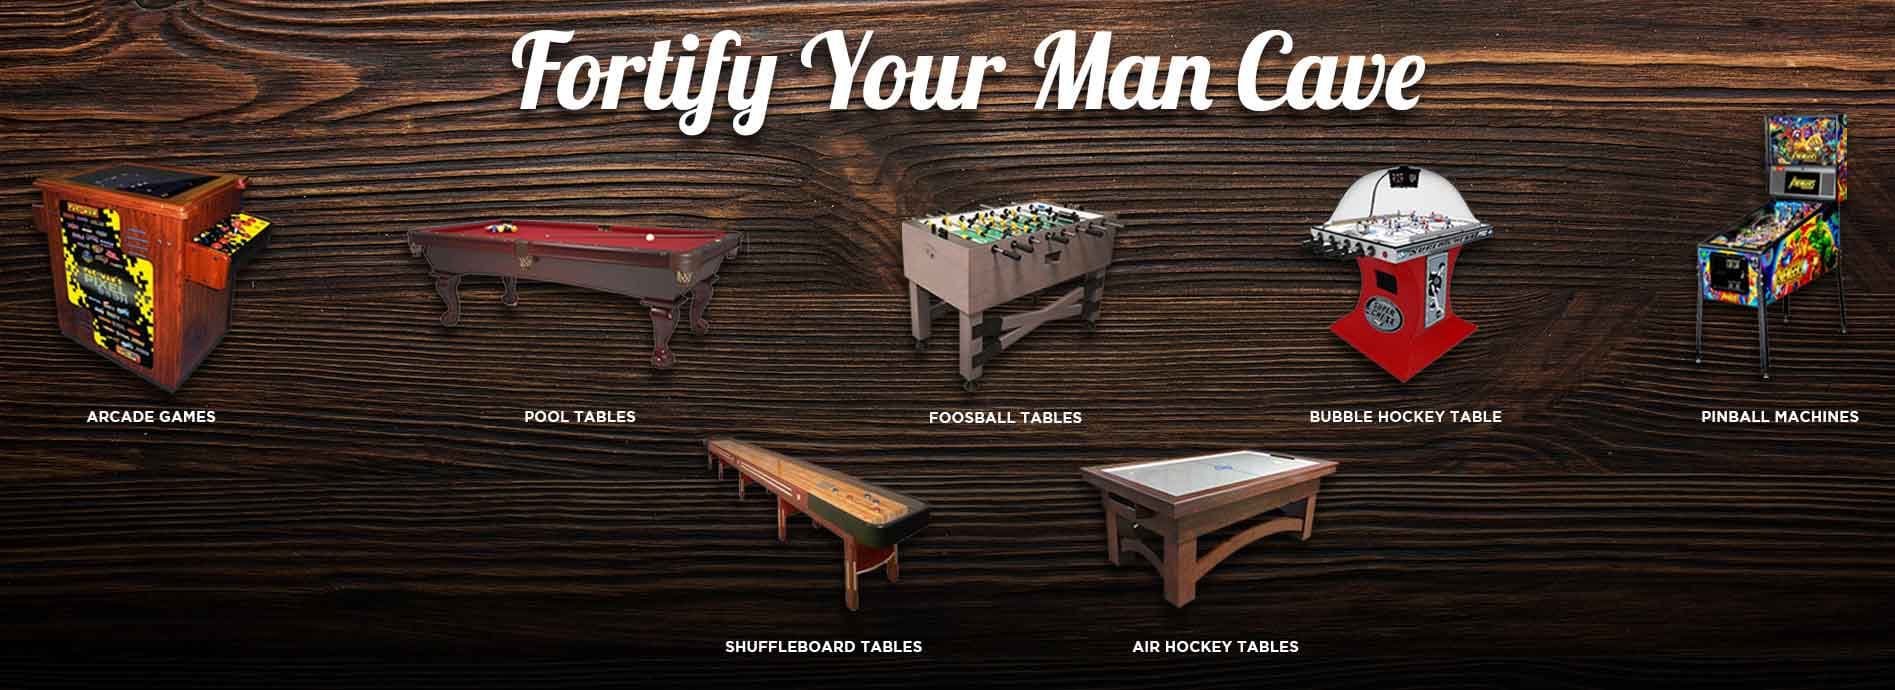 man cave games and furniture for sale by Game Exchange in Denver